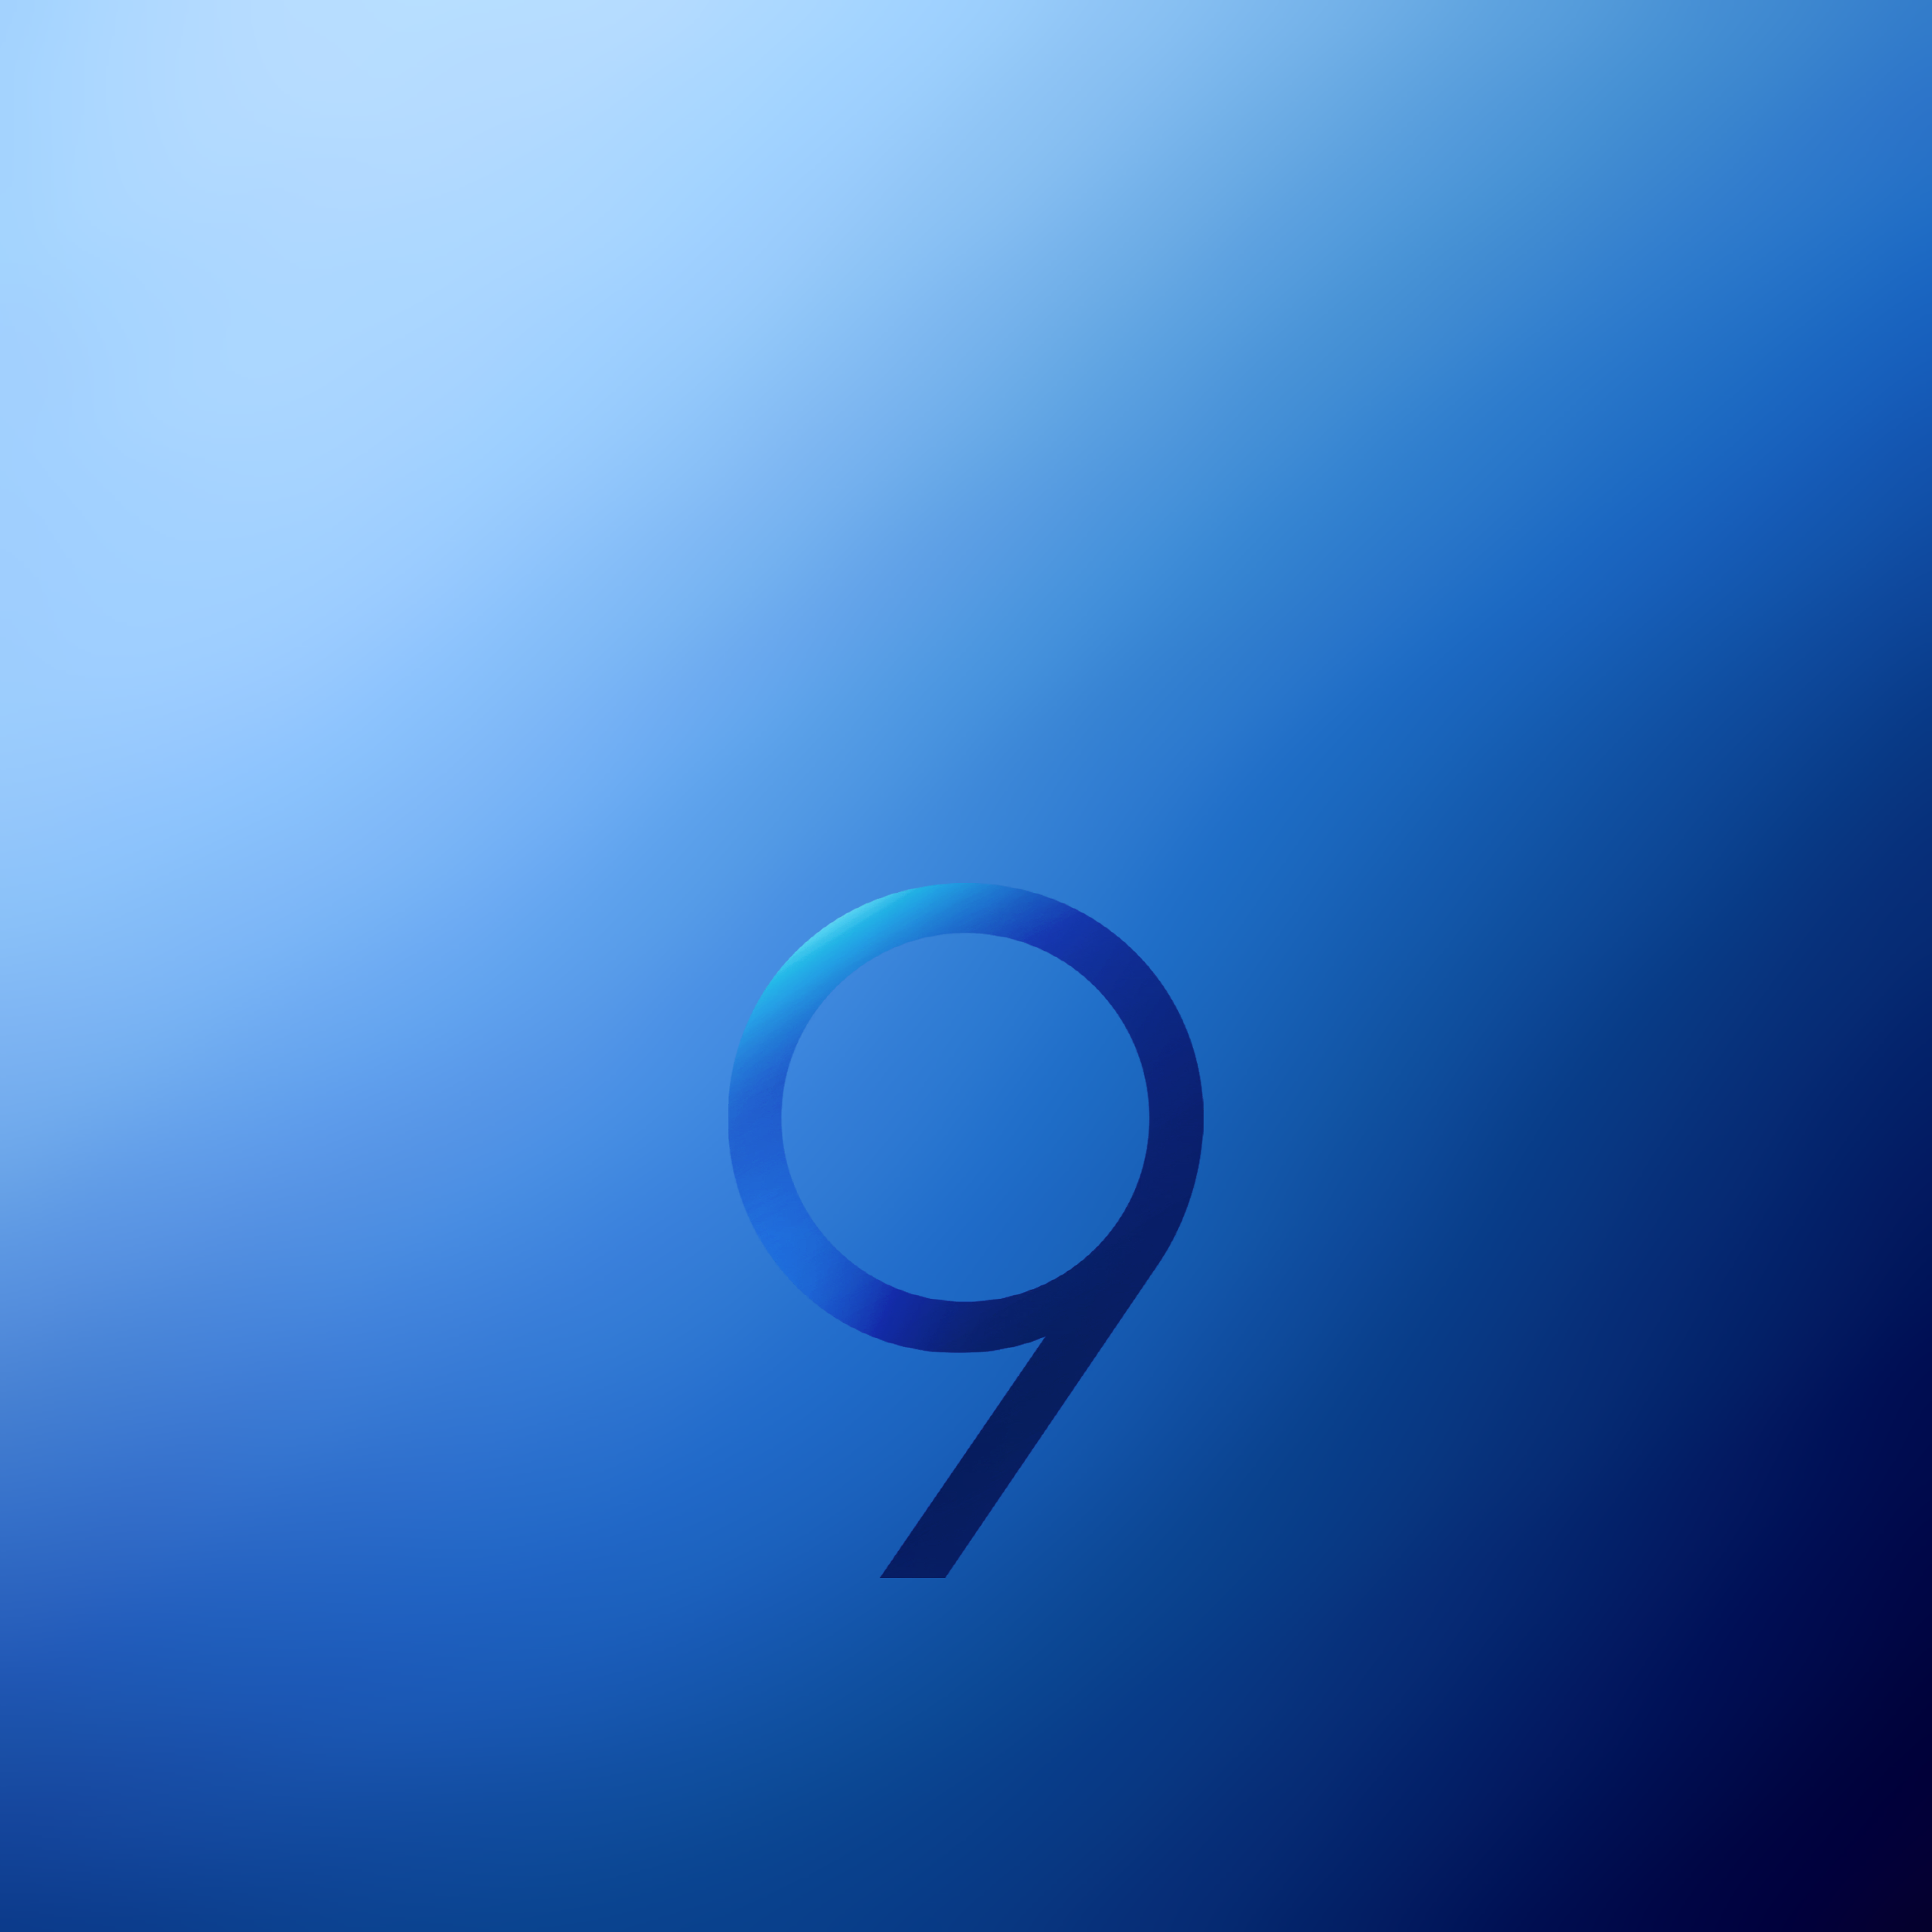 Samsung Galaxy S9 And Plus Stock Wallpaper Pack